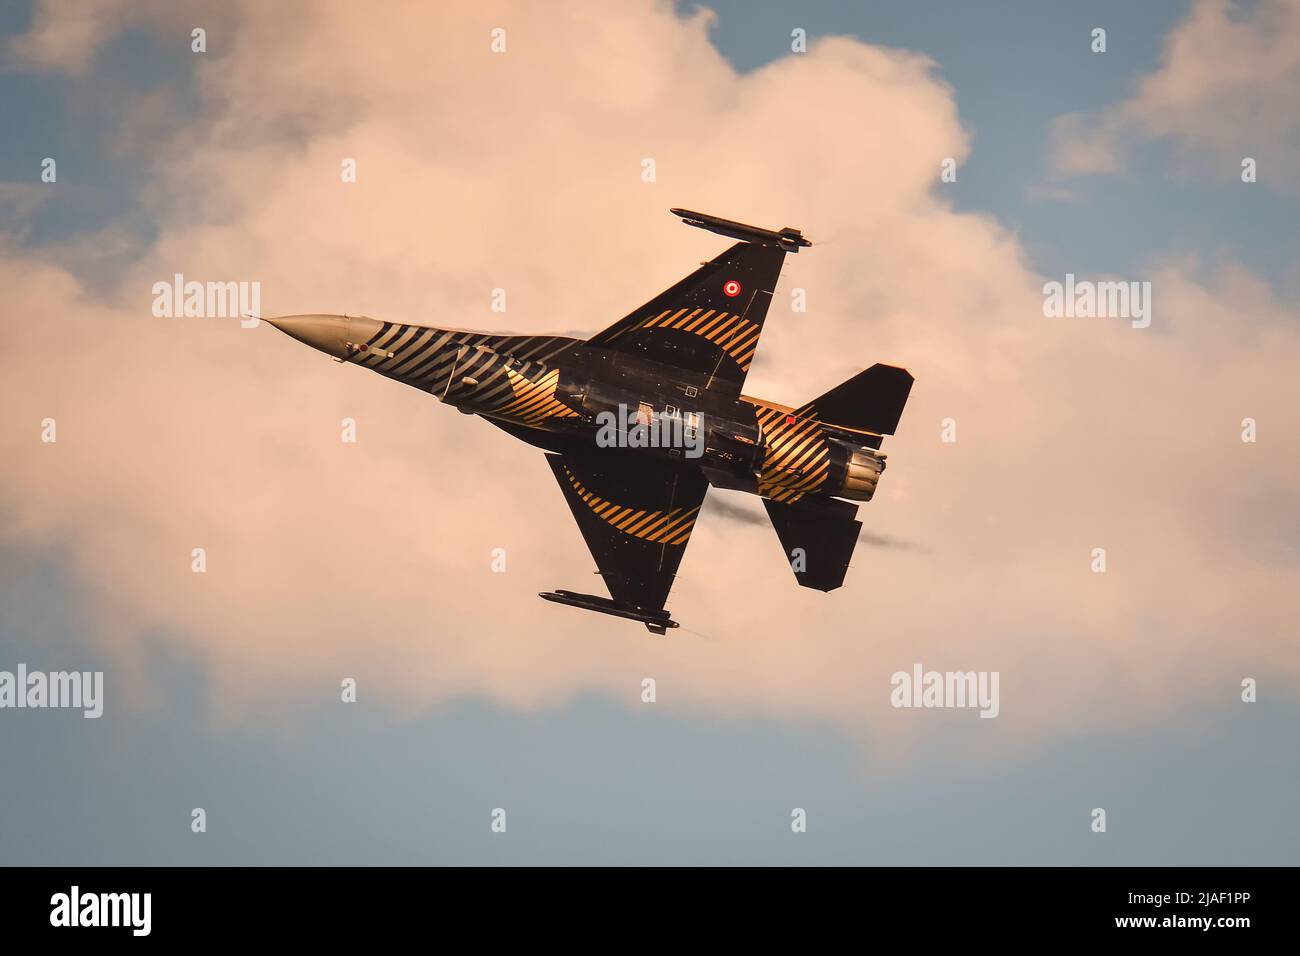 Gdynia, Poland - August 21, 2021: Flight of the F 16 plane at the Aero Baltic Show in Gdynia, Poland. Stock Photo